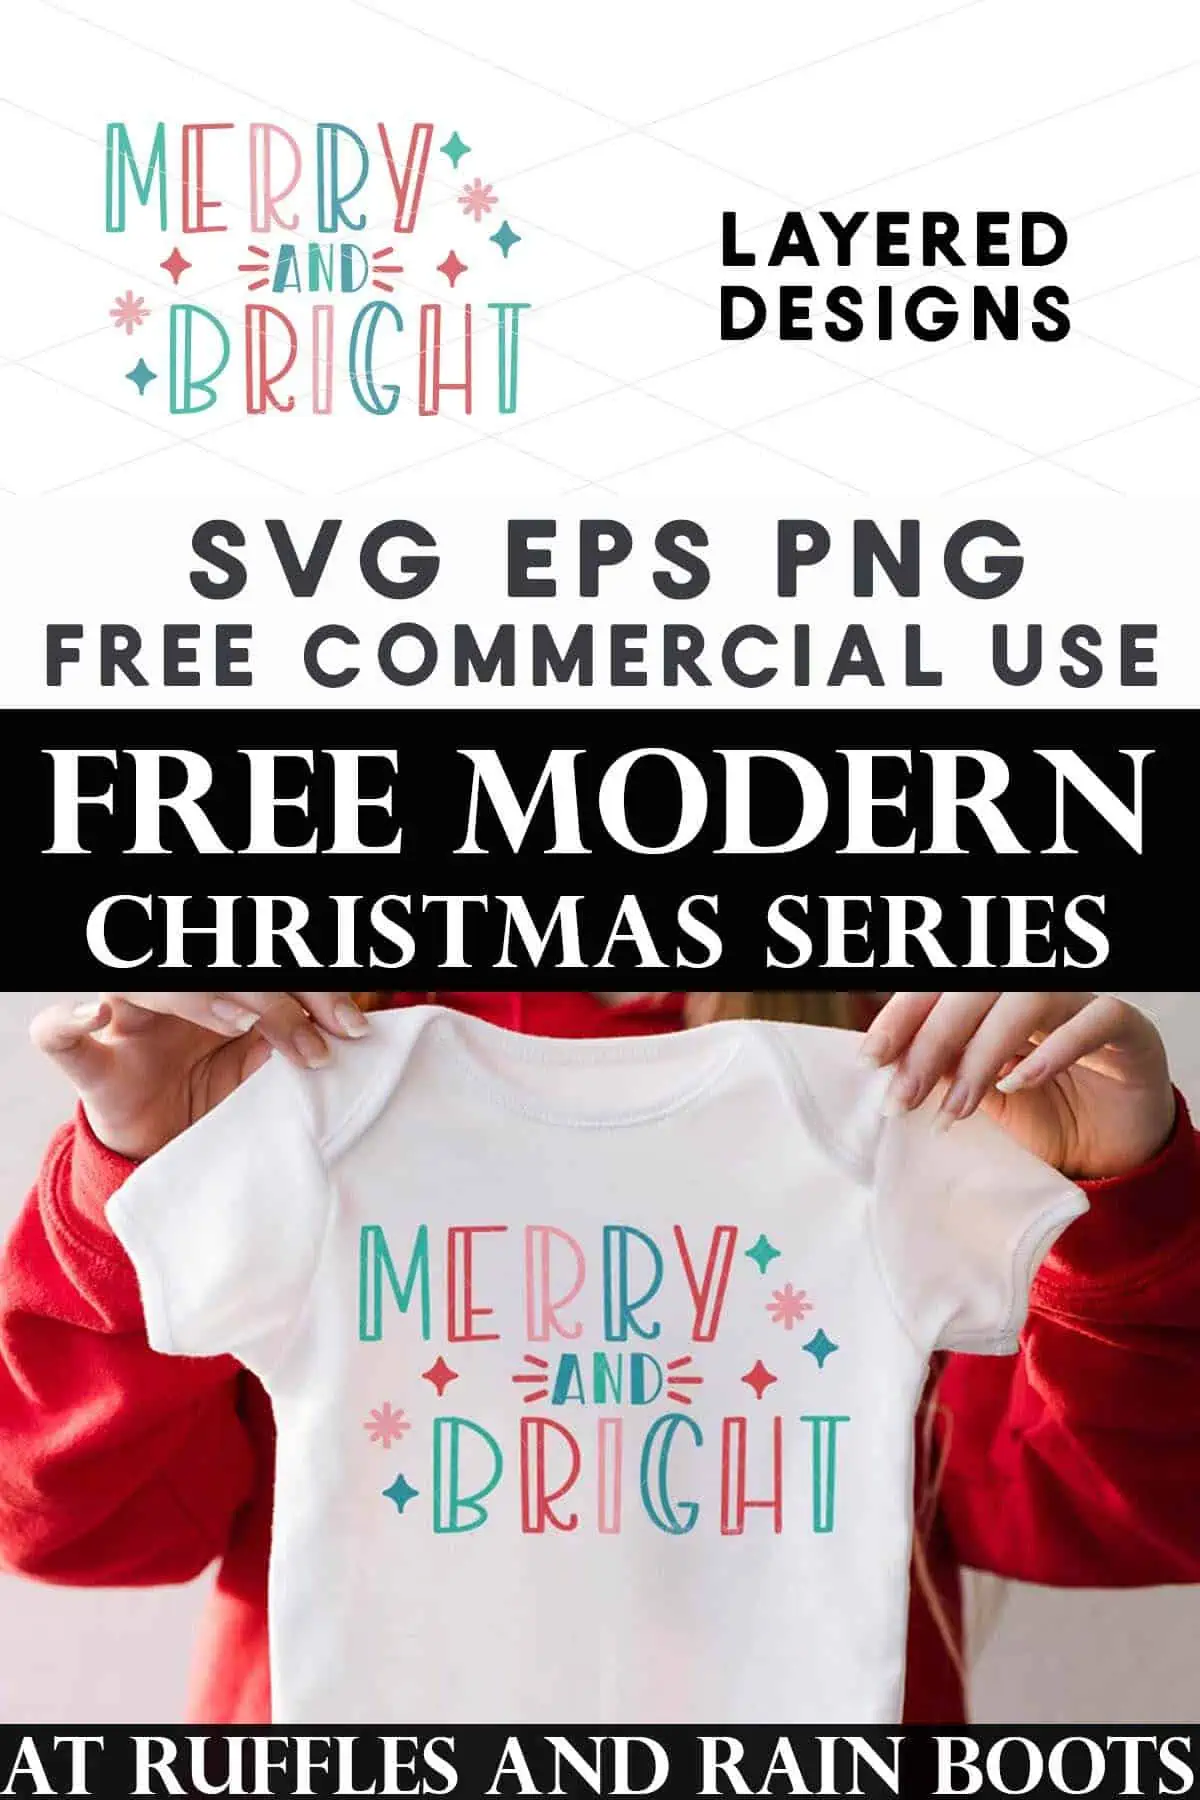 Split vertical image of colorful merry and bright with star accents on white baby body suit with text which reads free modern Christmas series.